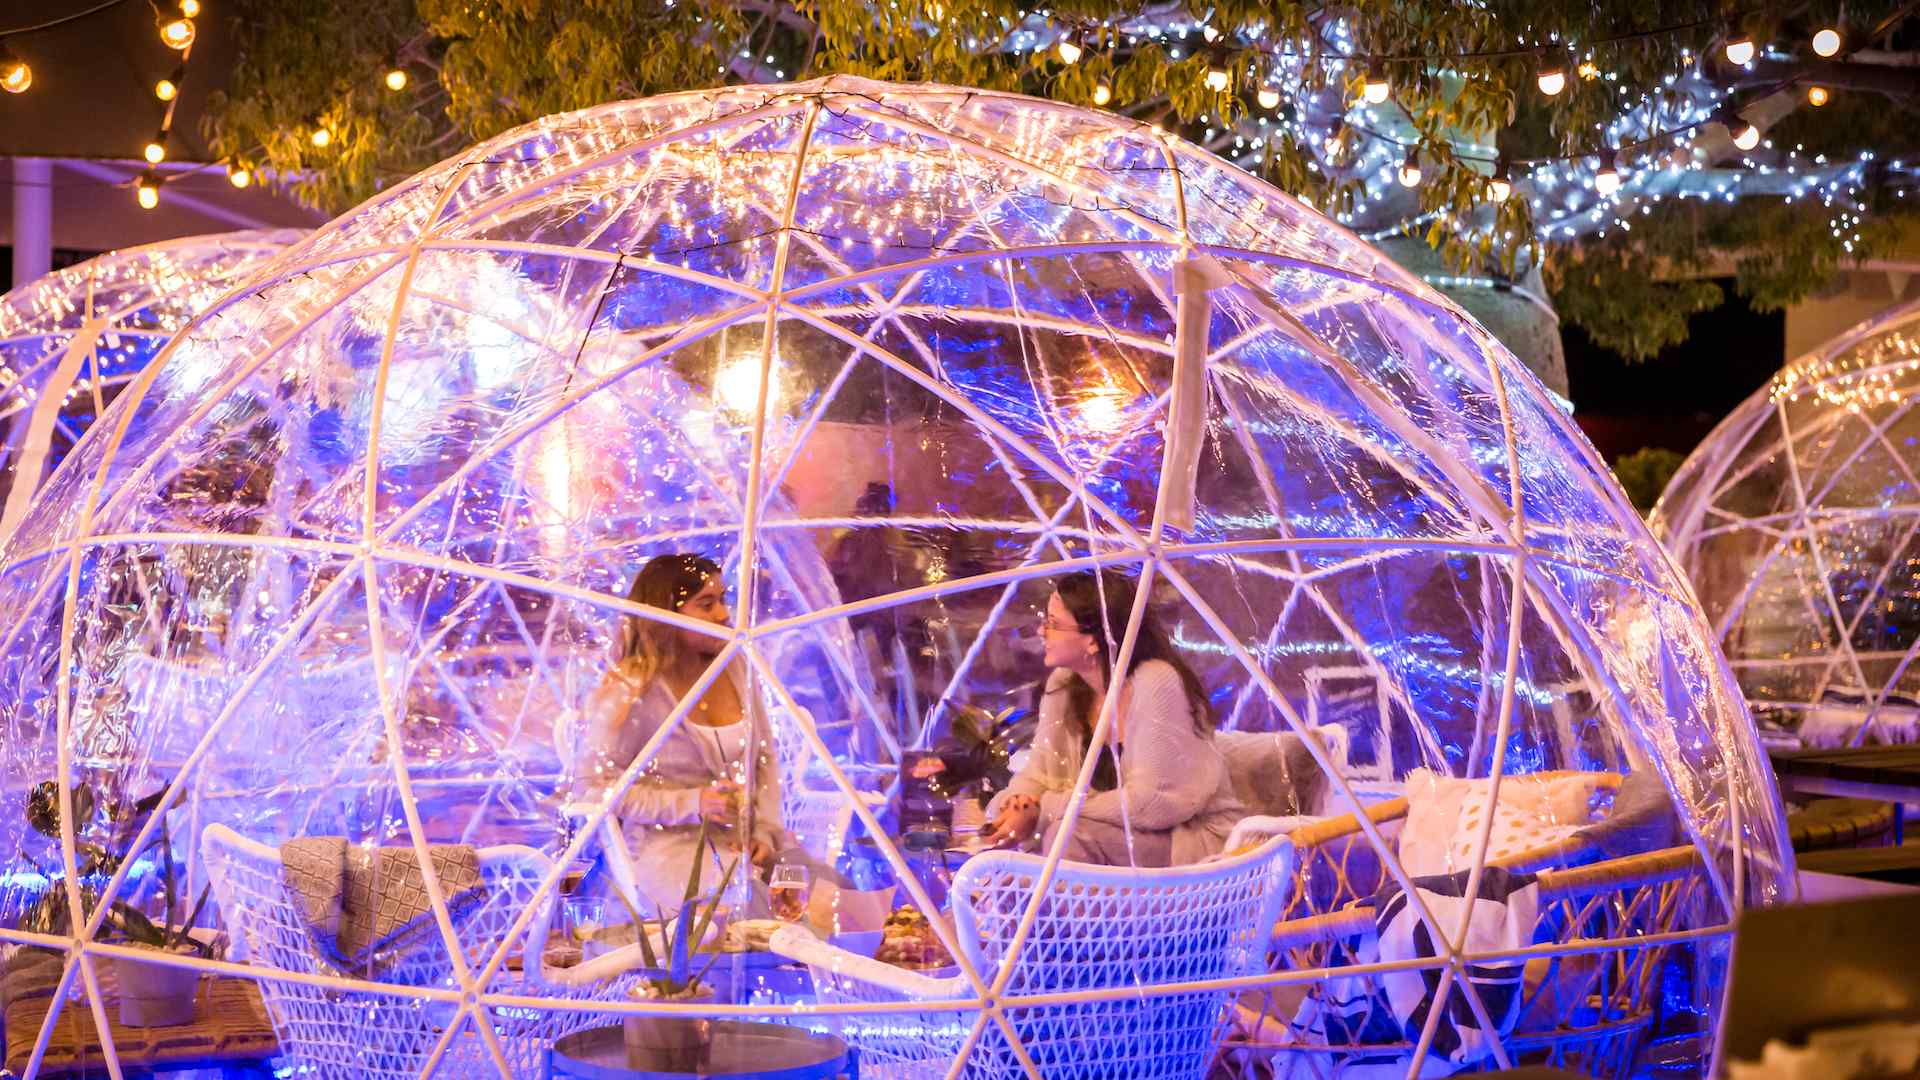 You Can Now Hire Out a Private Igloo for Dinner and Drinks at the Cleveland Sands Hotel